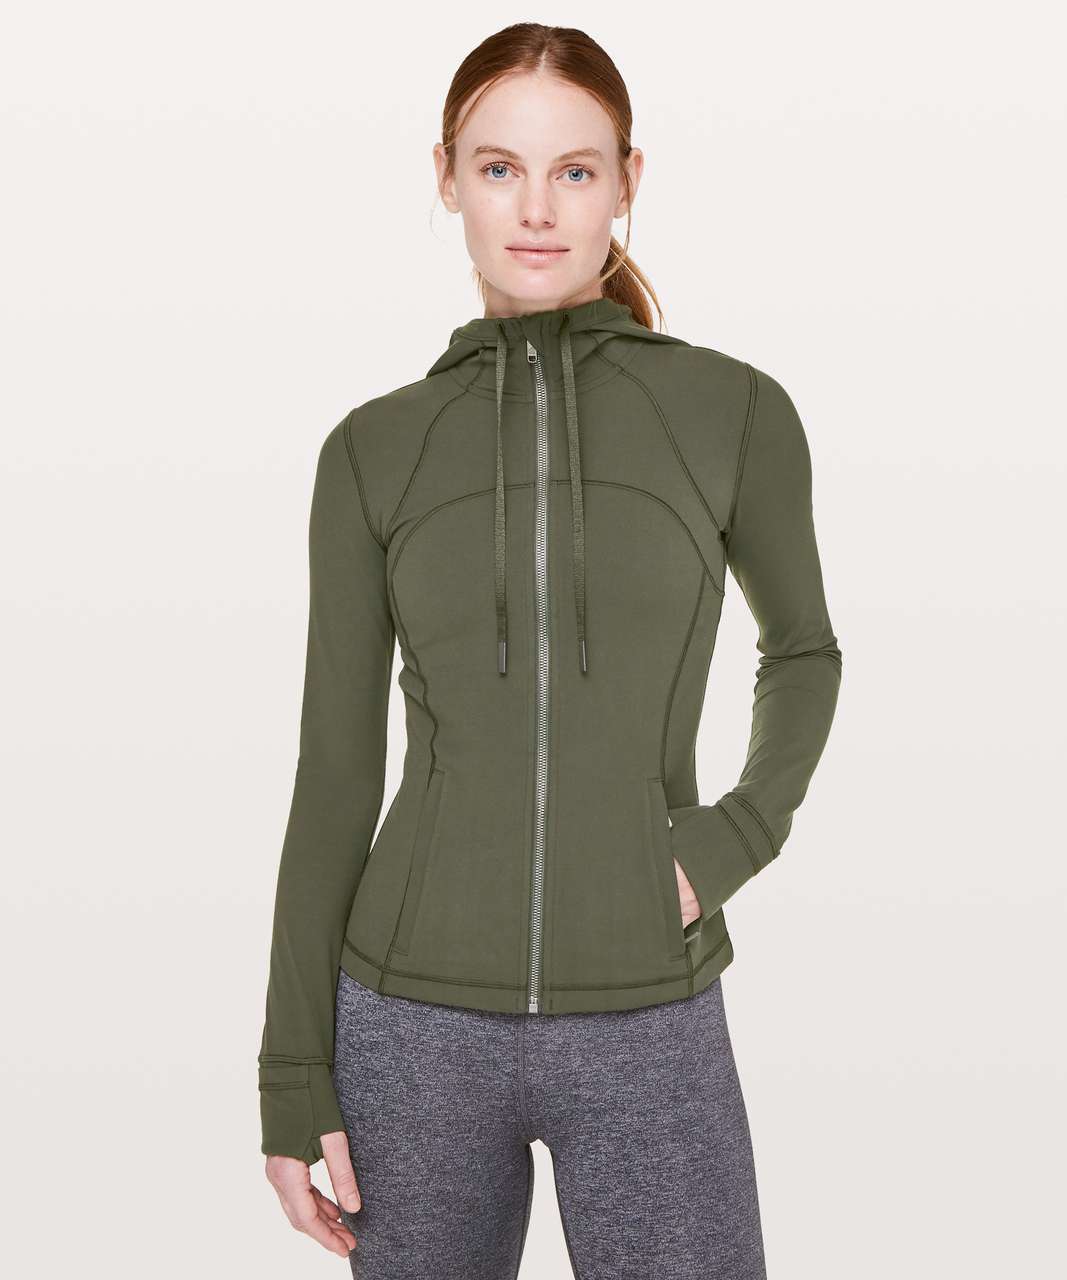 Lululemon Jacket With Hood  International Society of Precision Agriculture